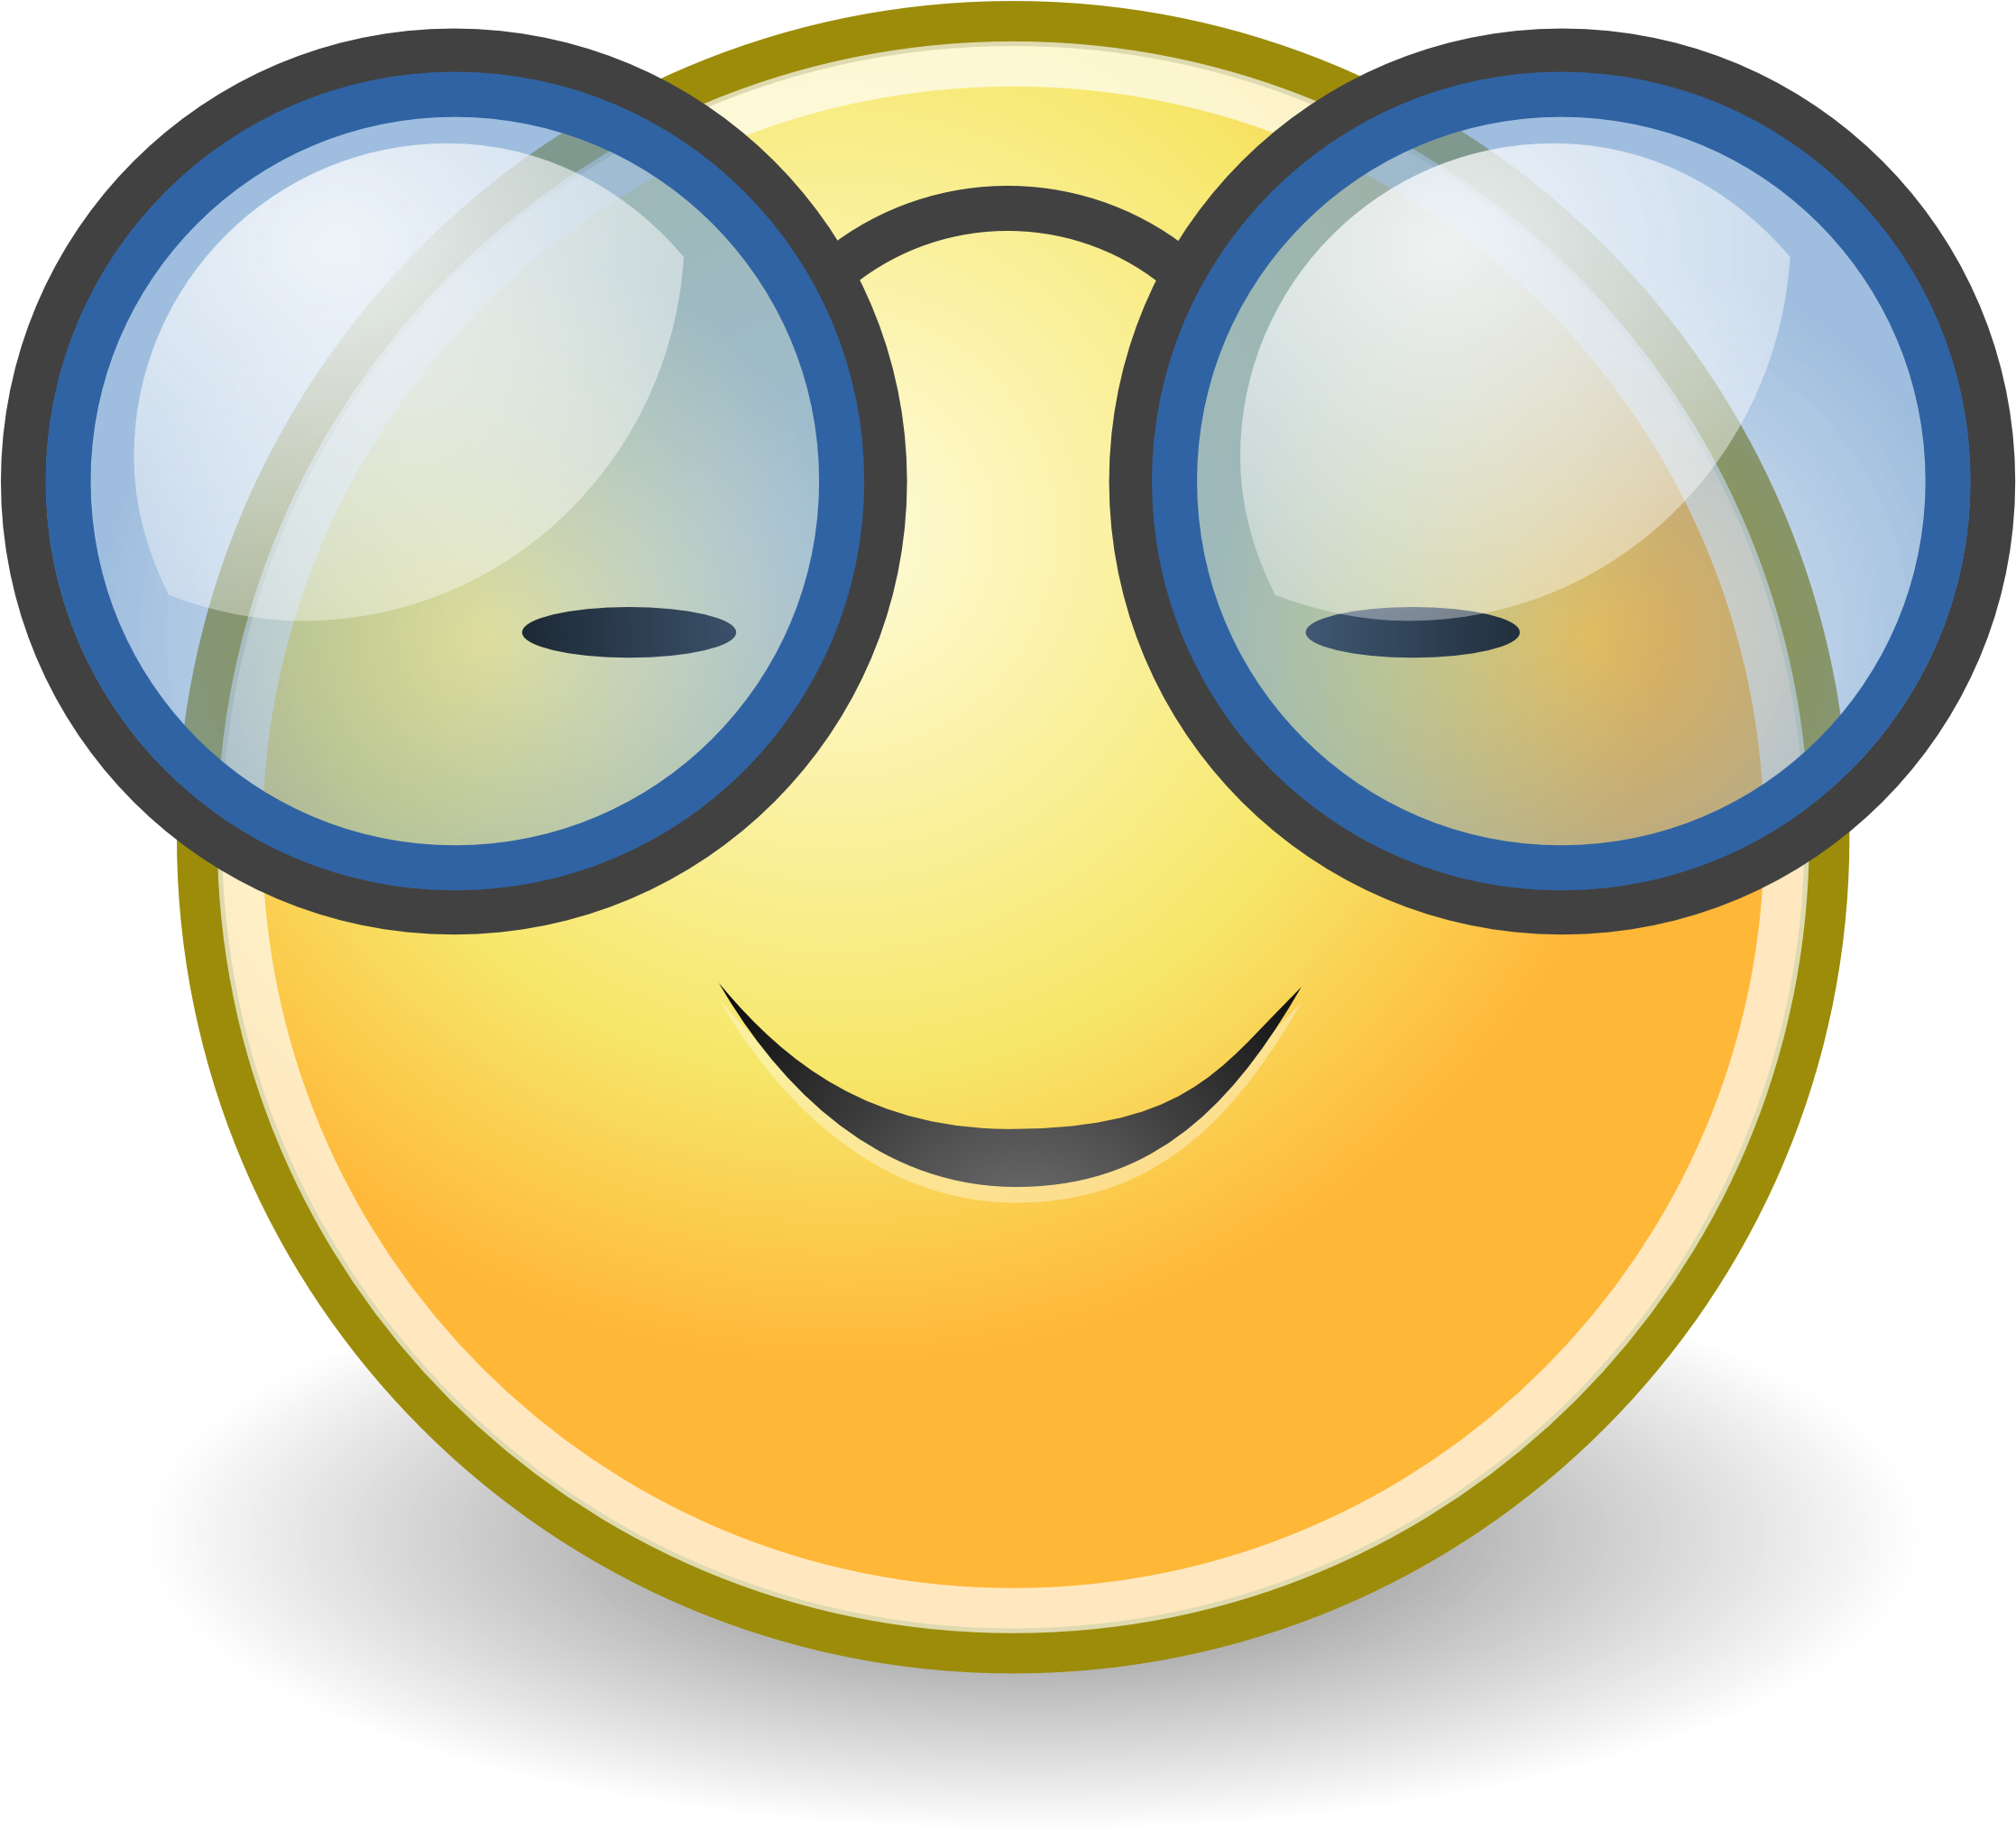 Tango Face Glasses - Smiley Face With Glasses (2400x2400)